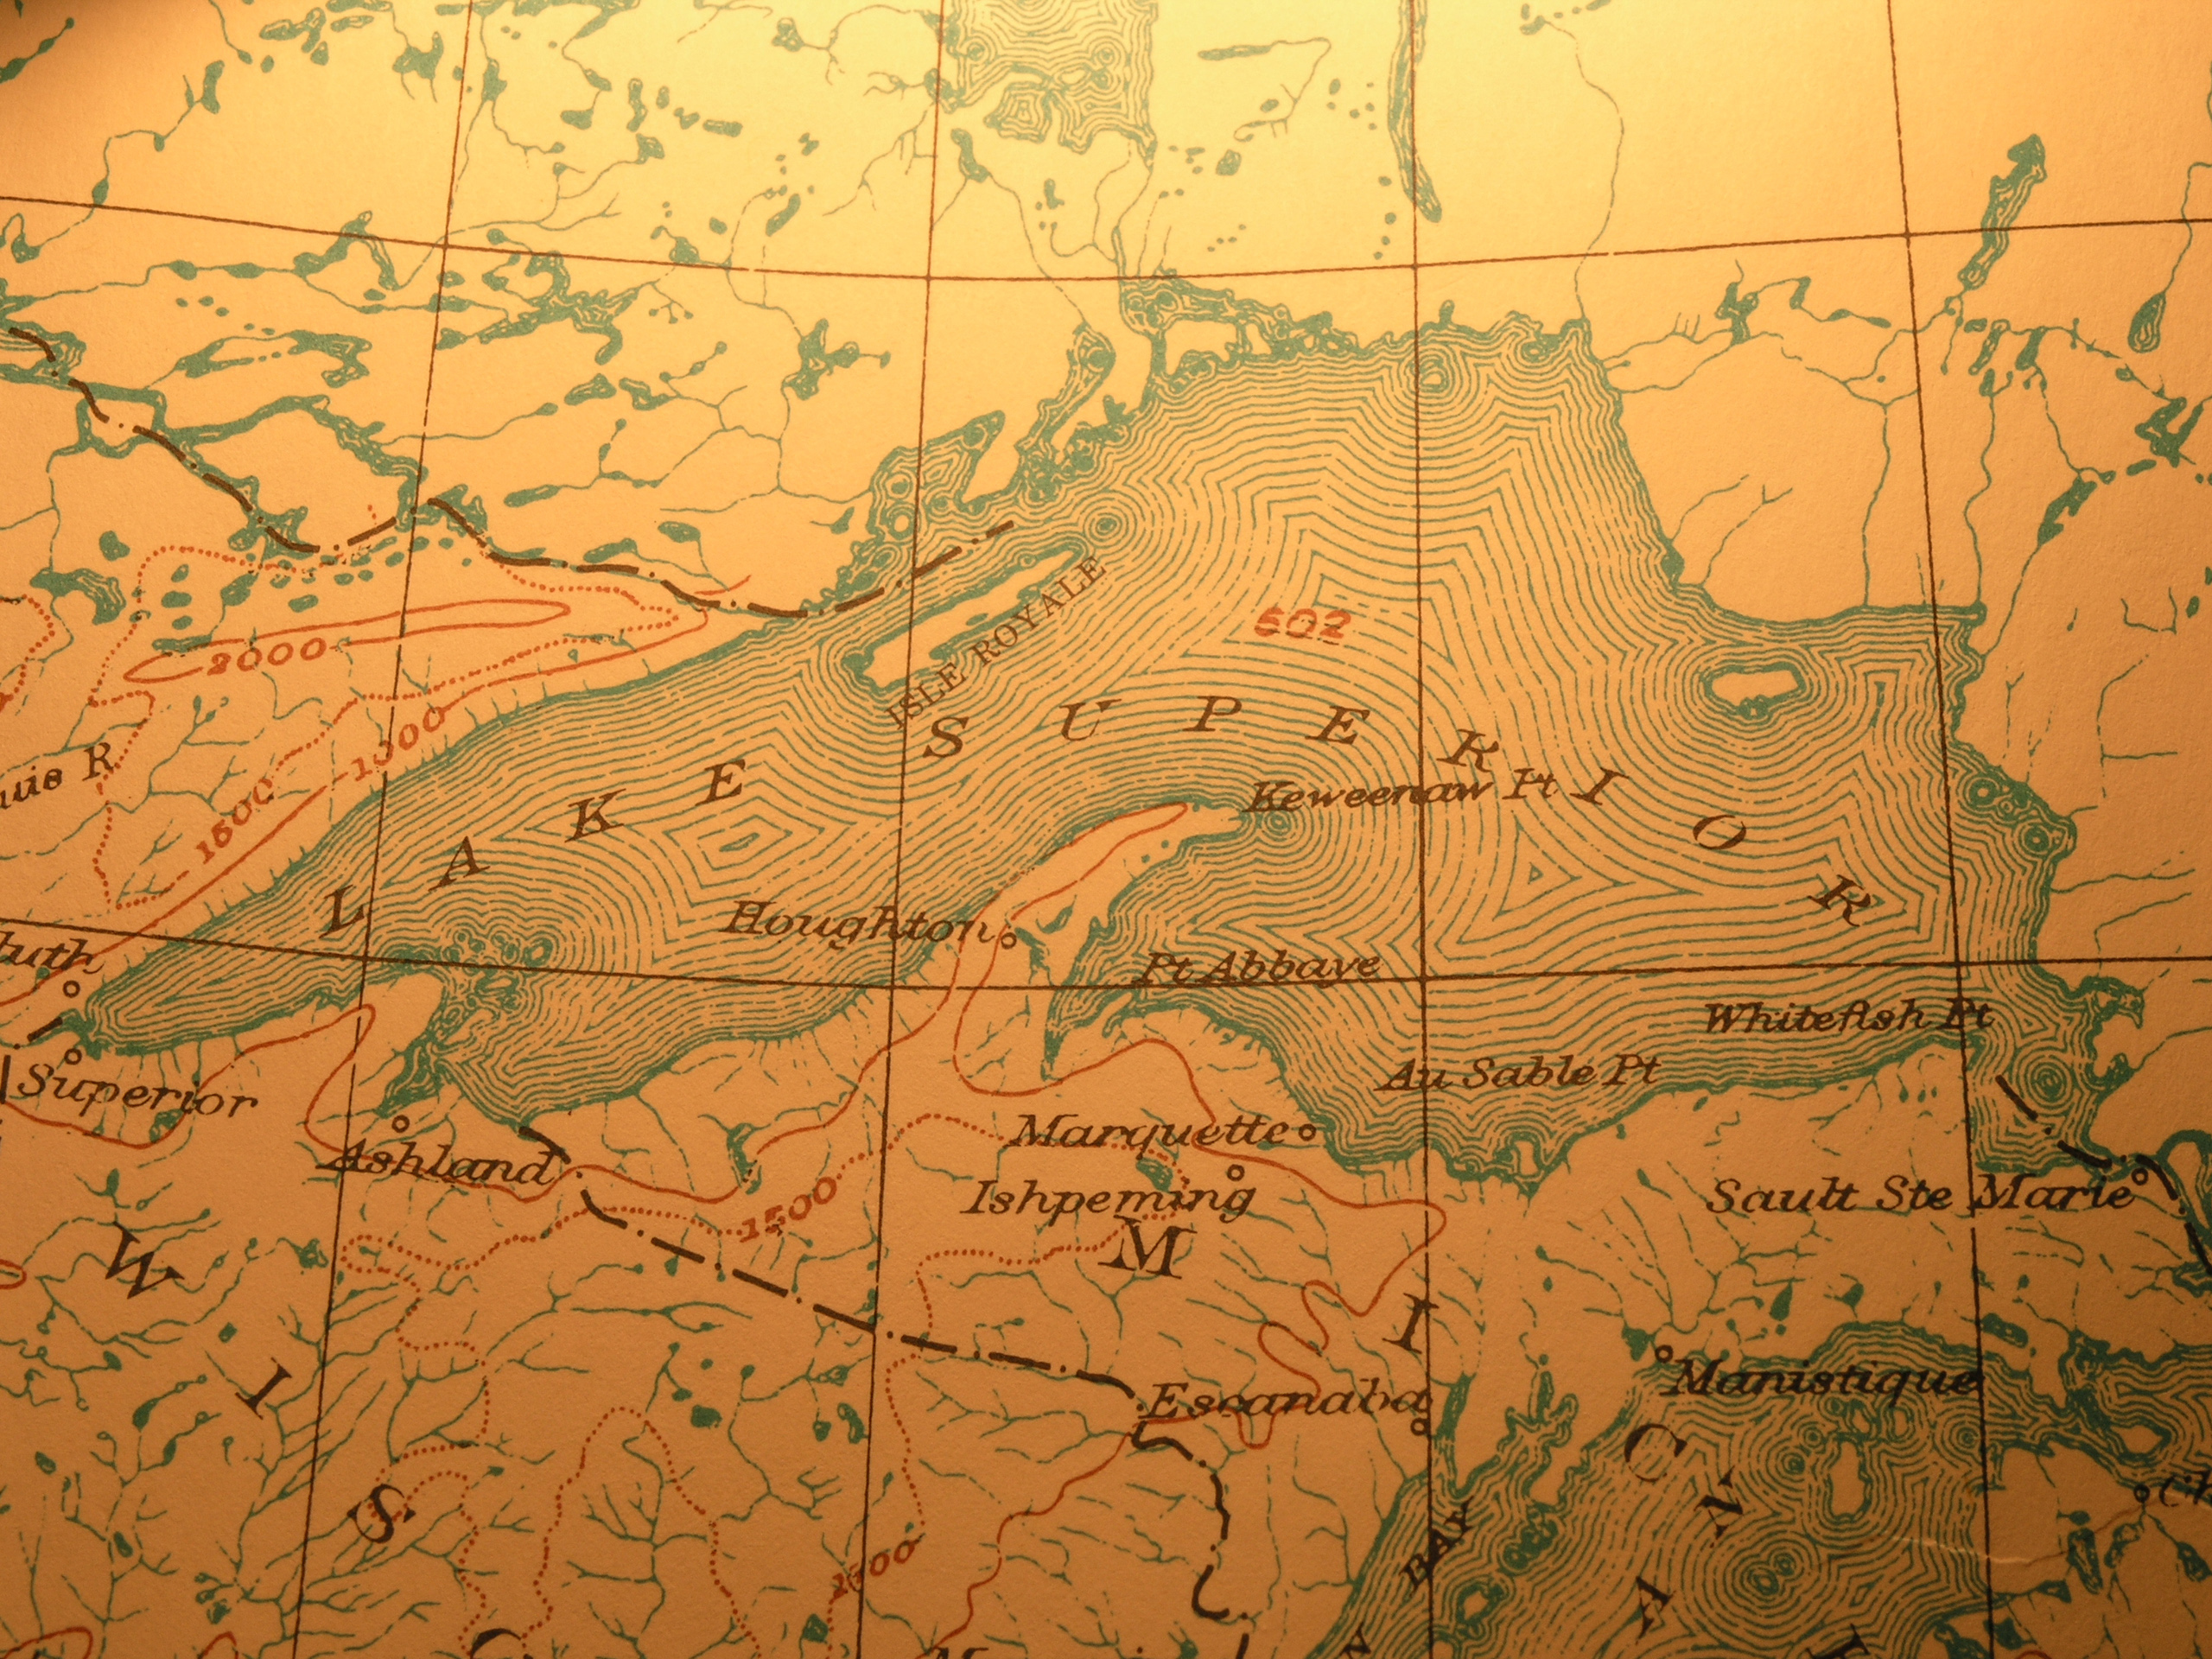 Two Ships Discovered In Lake Superior After Disappearing Over A Century Ago